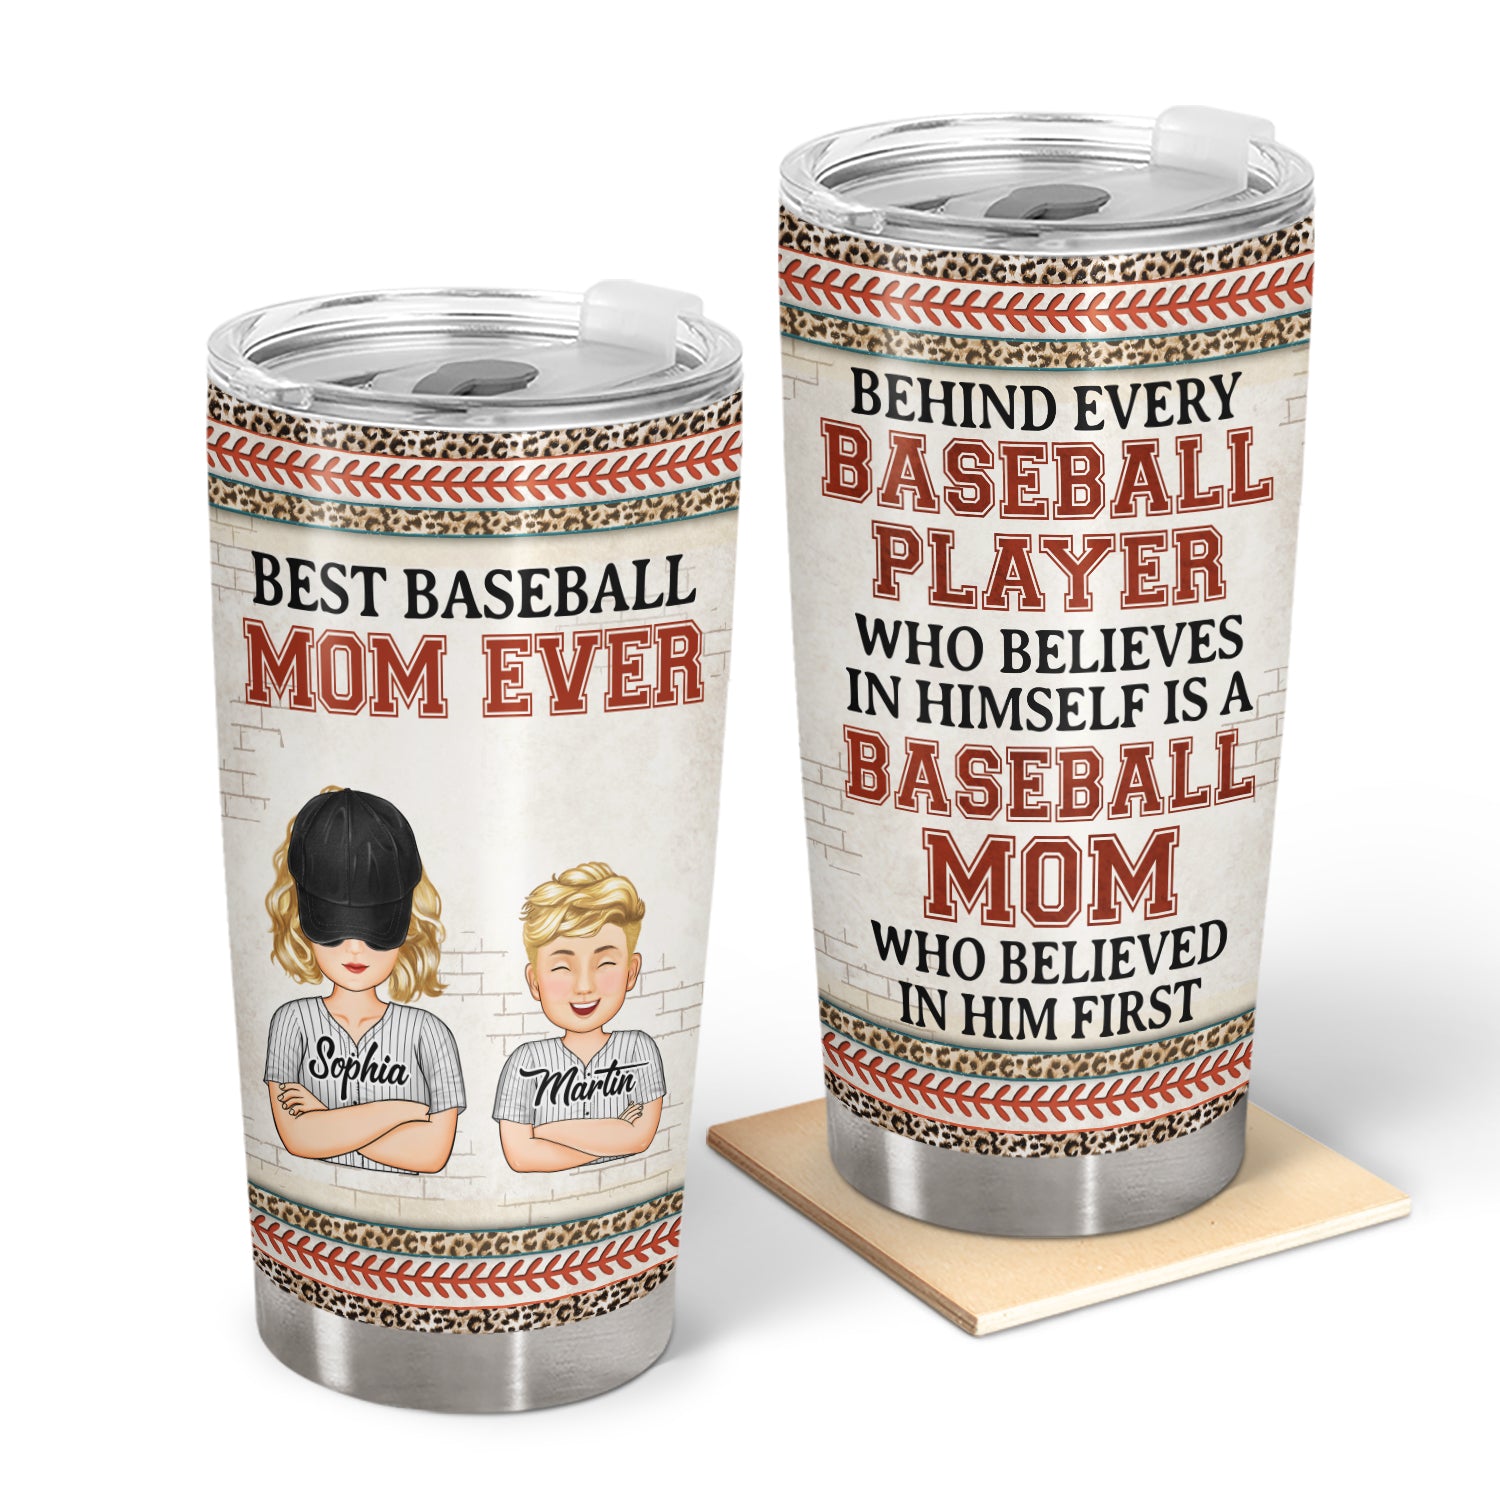 Every Baseball Player Who Believes In Himself - Birthday, Loving Gift For Sport Fan, Mom, Mother - Personalized Custom Tumbler